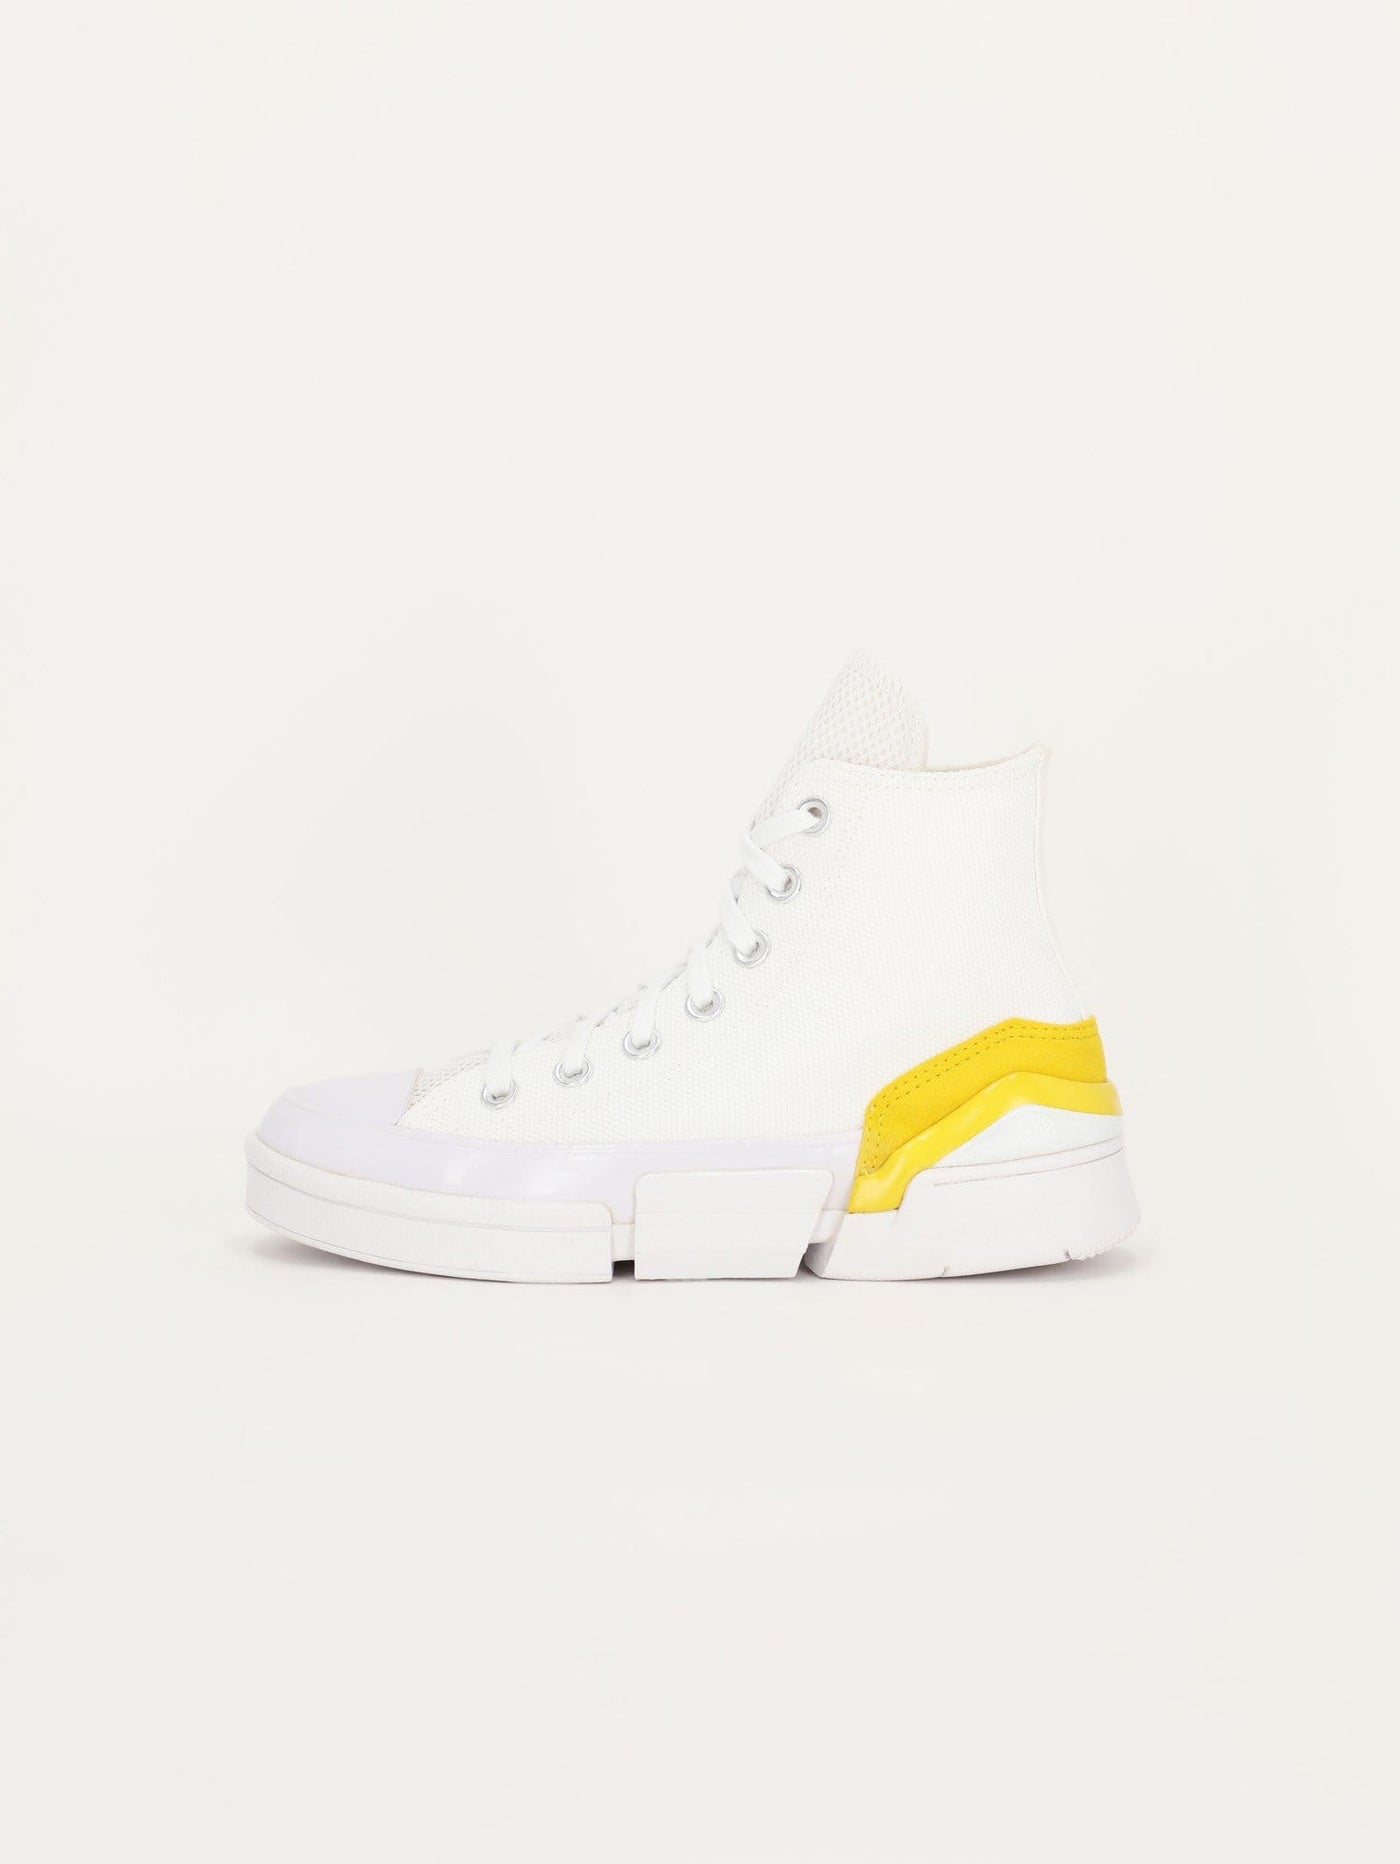 Converse Sneakers Mix and Match CPX70 High Top Sneakers - 568648C